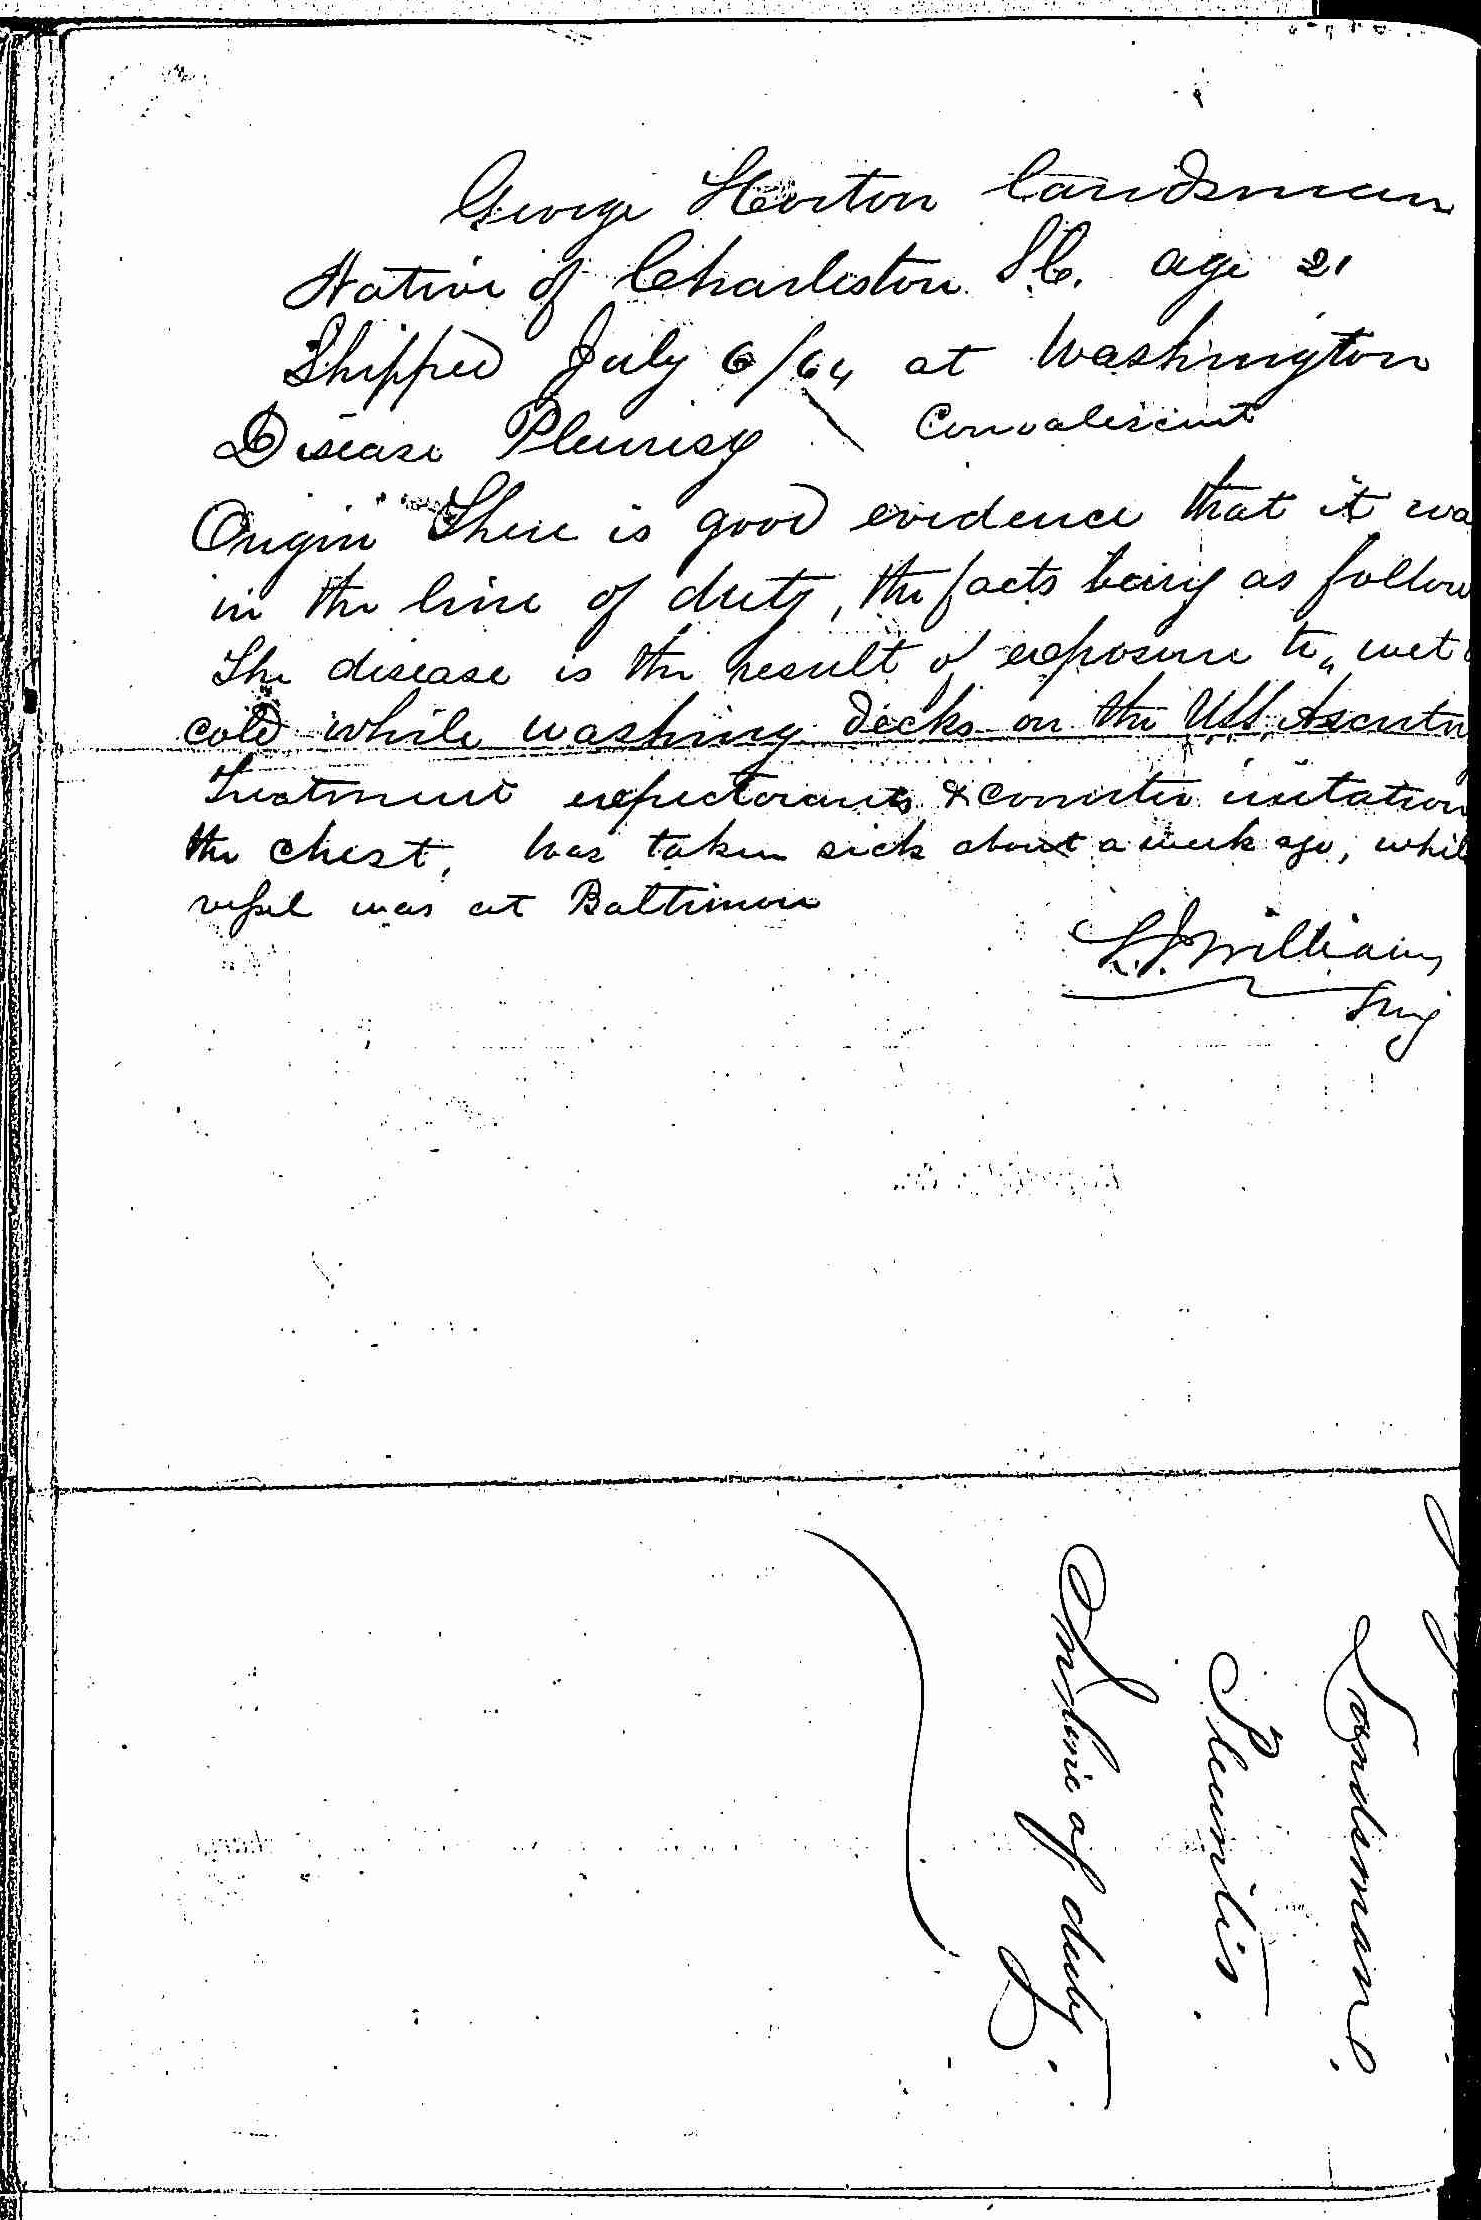 Entry for George Horton (page 2 of 2) in the log Hospital Tickets and Case Papers - Naval Hospital - Washington, D.C. - 1866-68